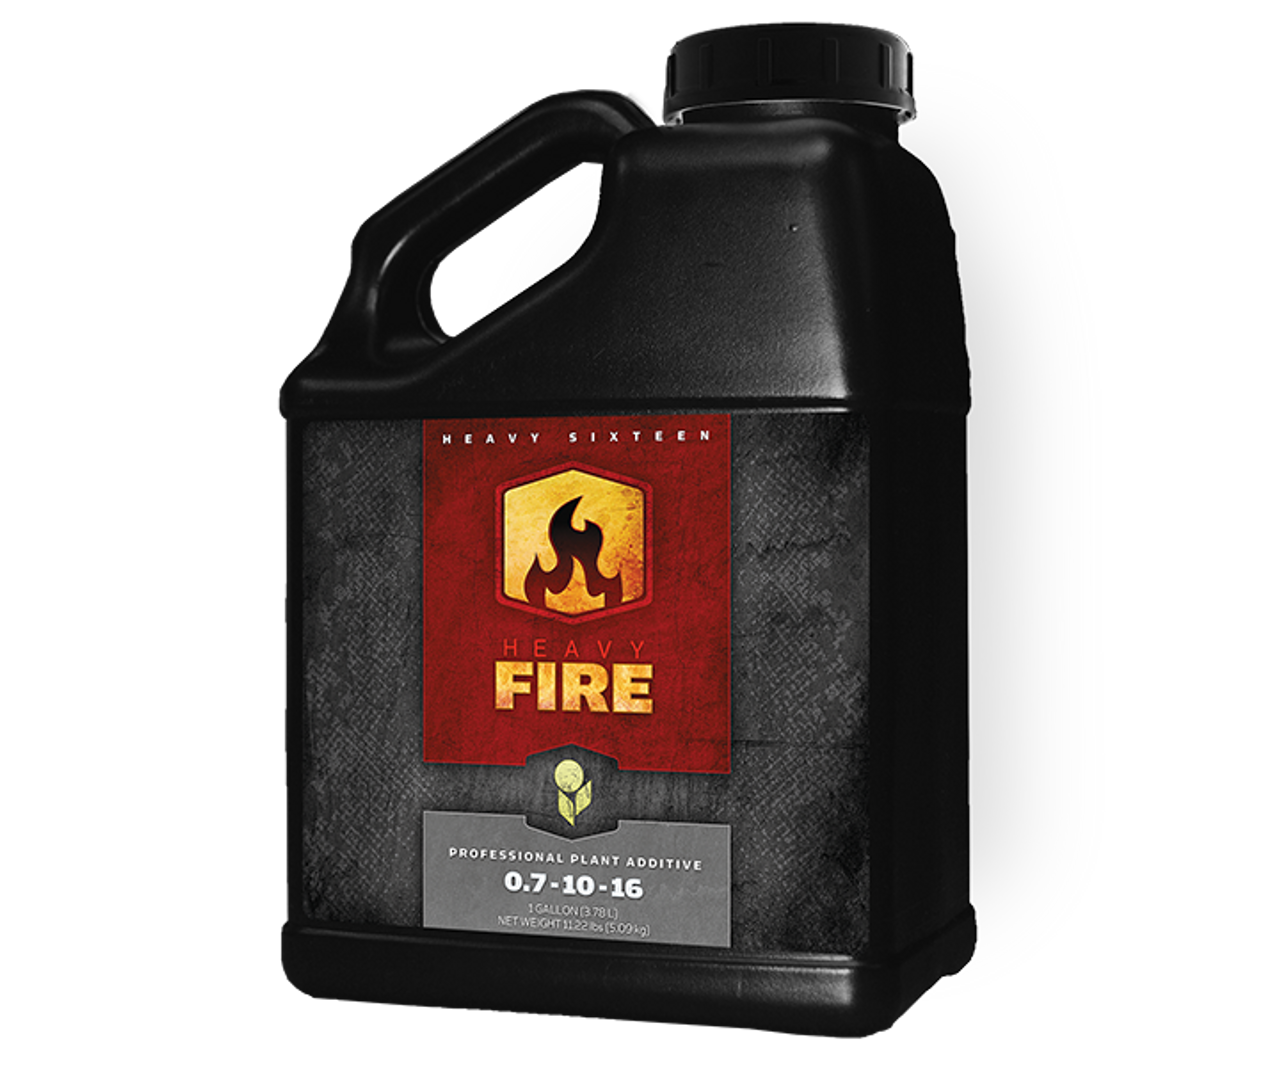 Heavy 16 Fire 15 Gallon (Freight Only) - 1